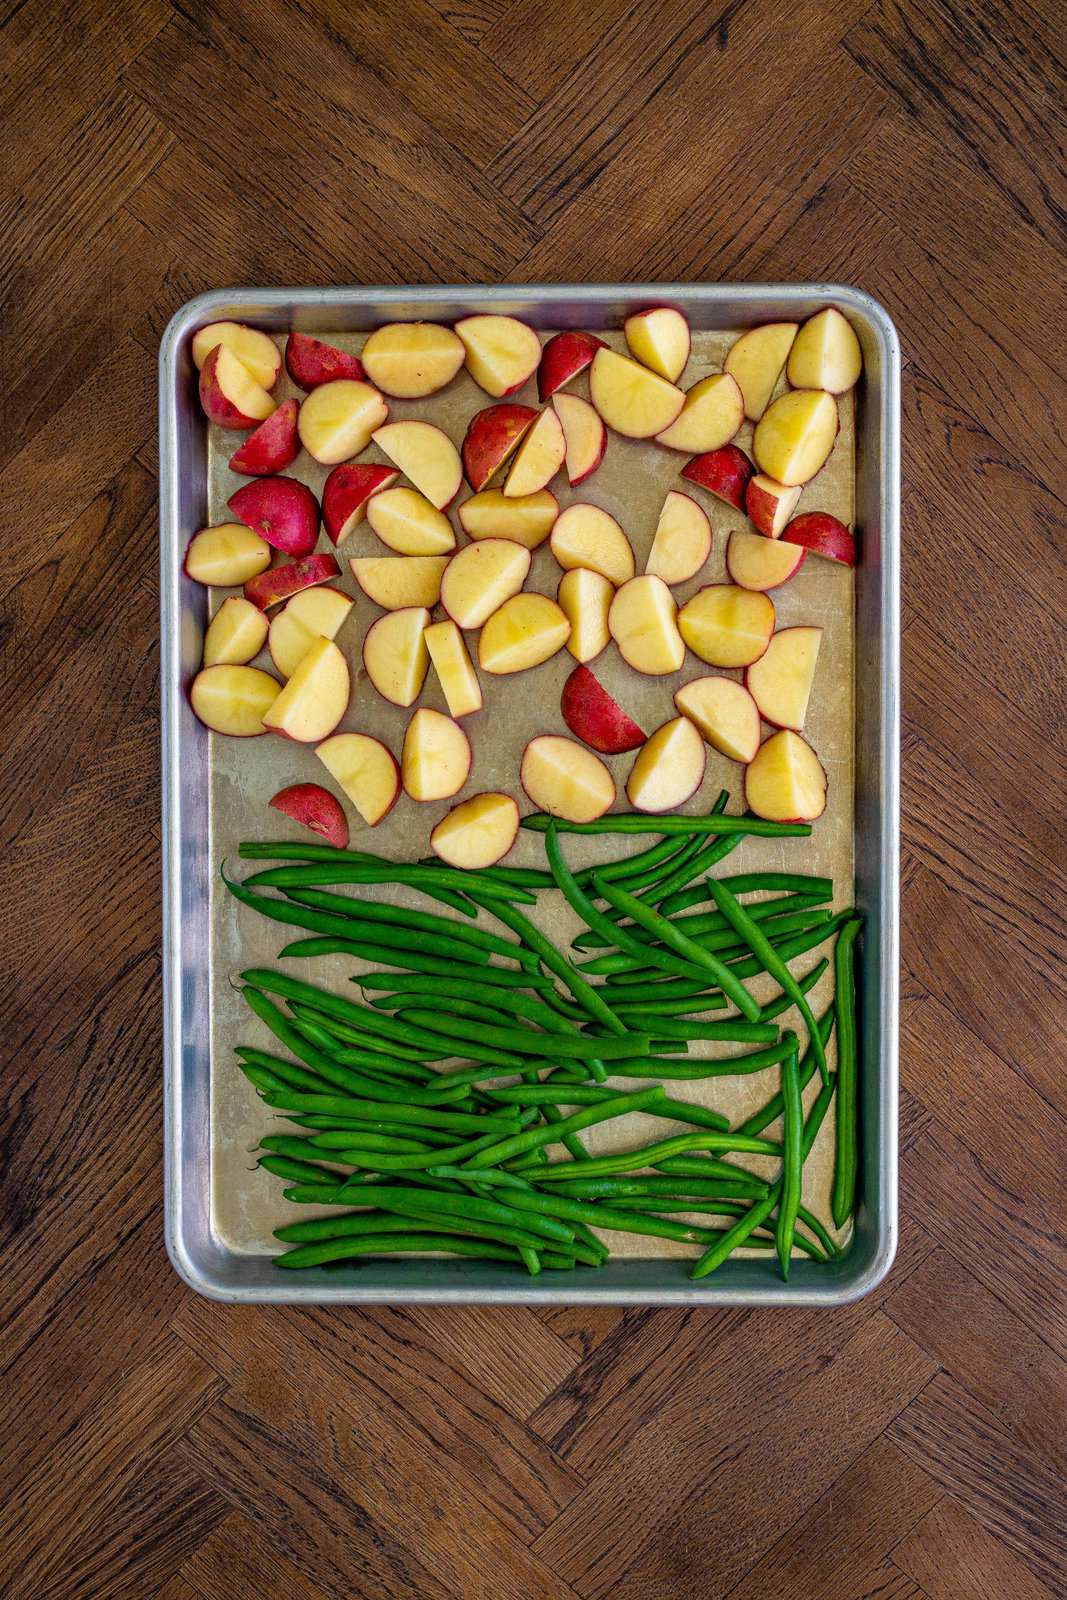 Potatoes and green beans placed on sheet pan.